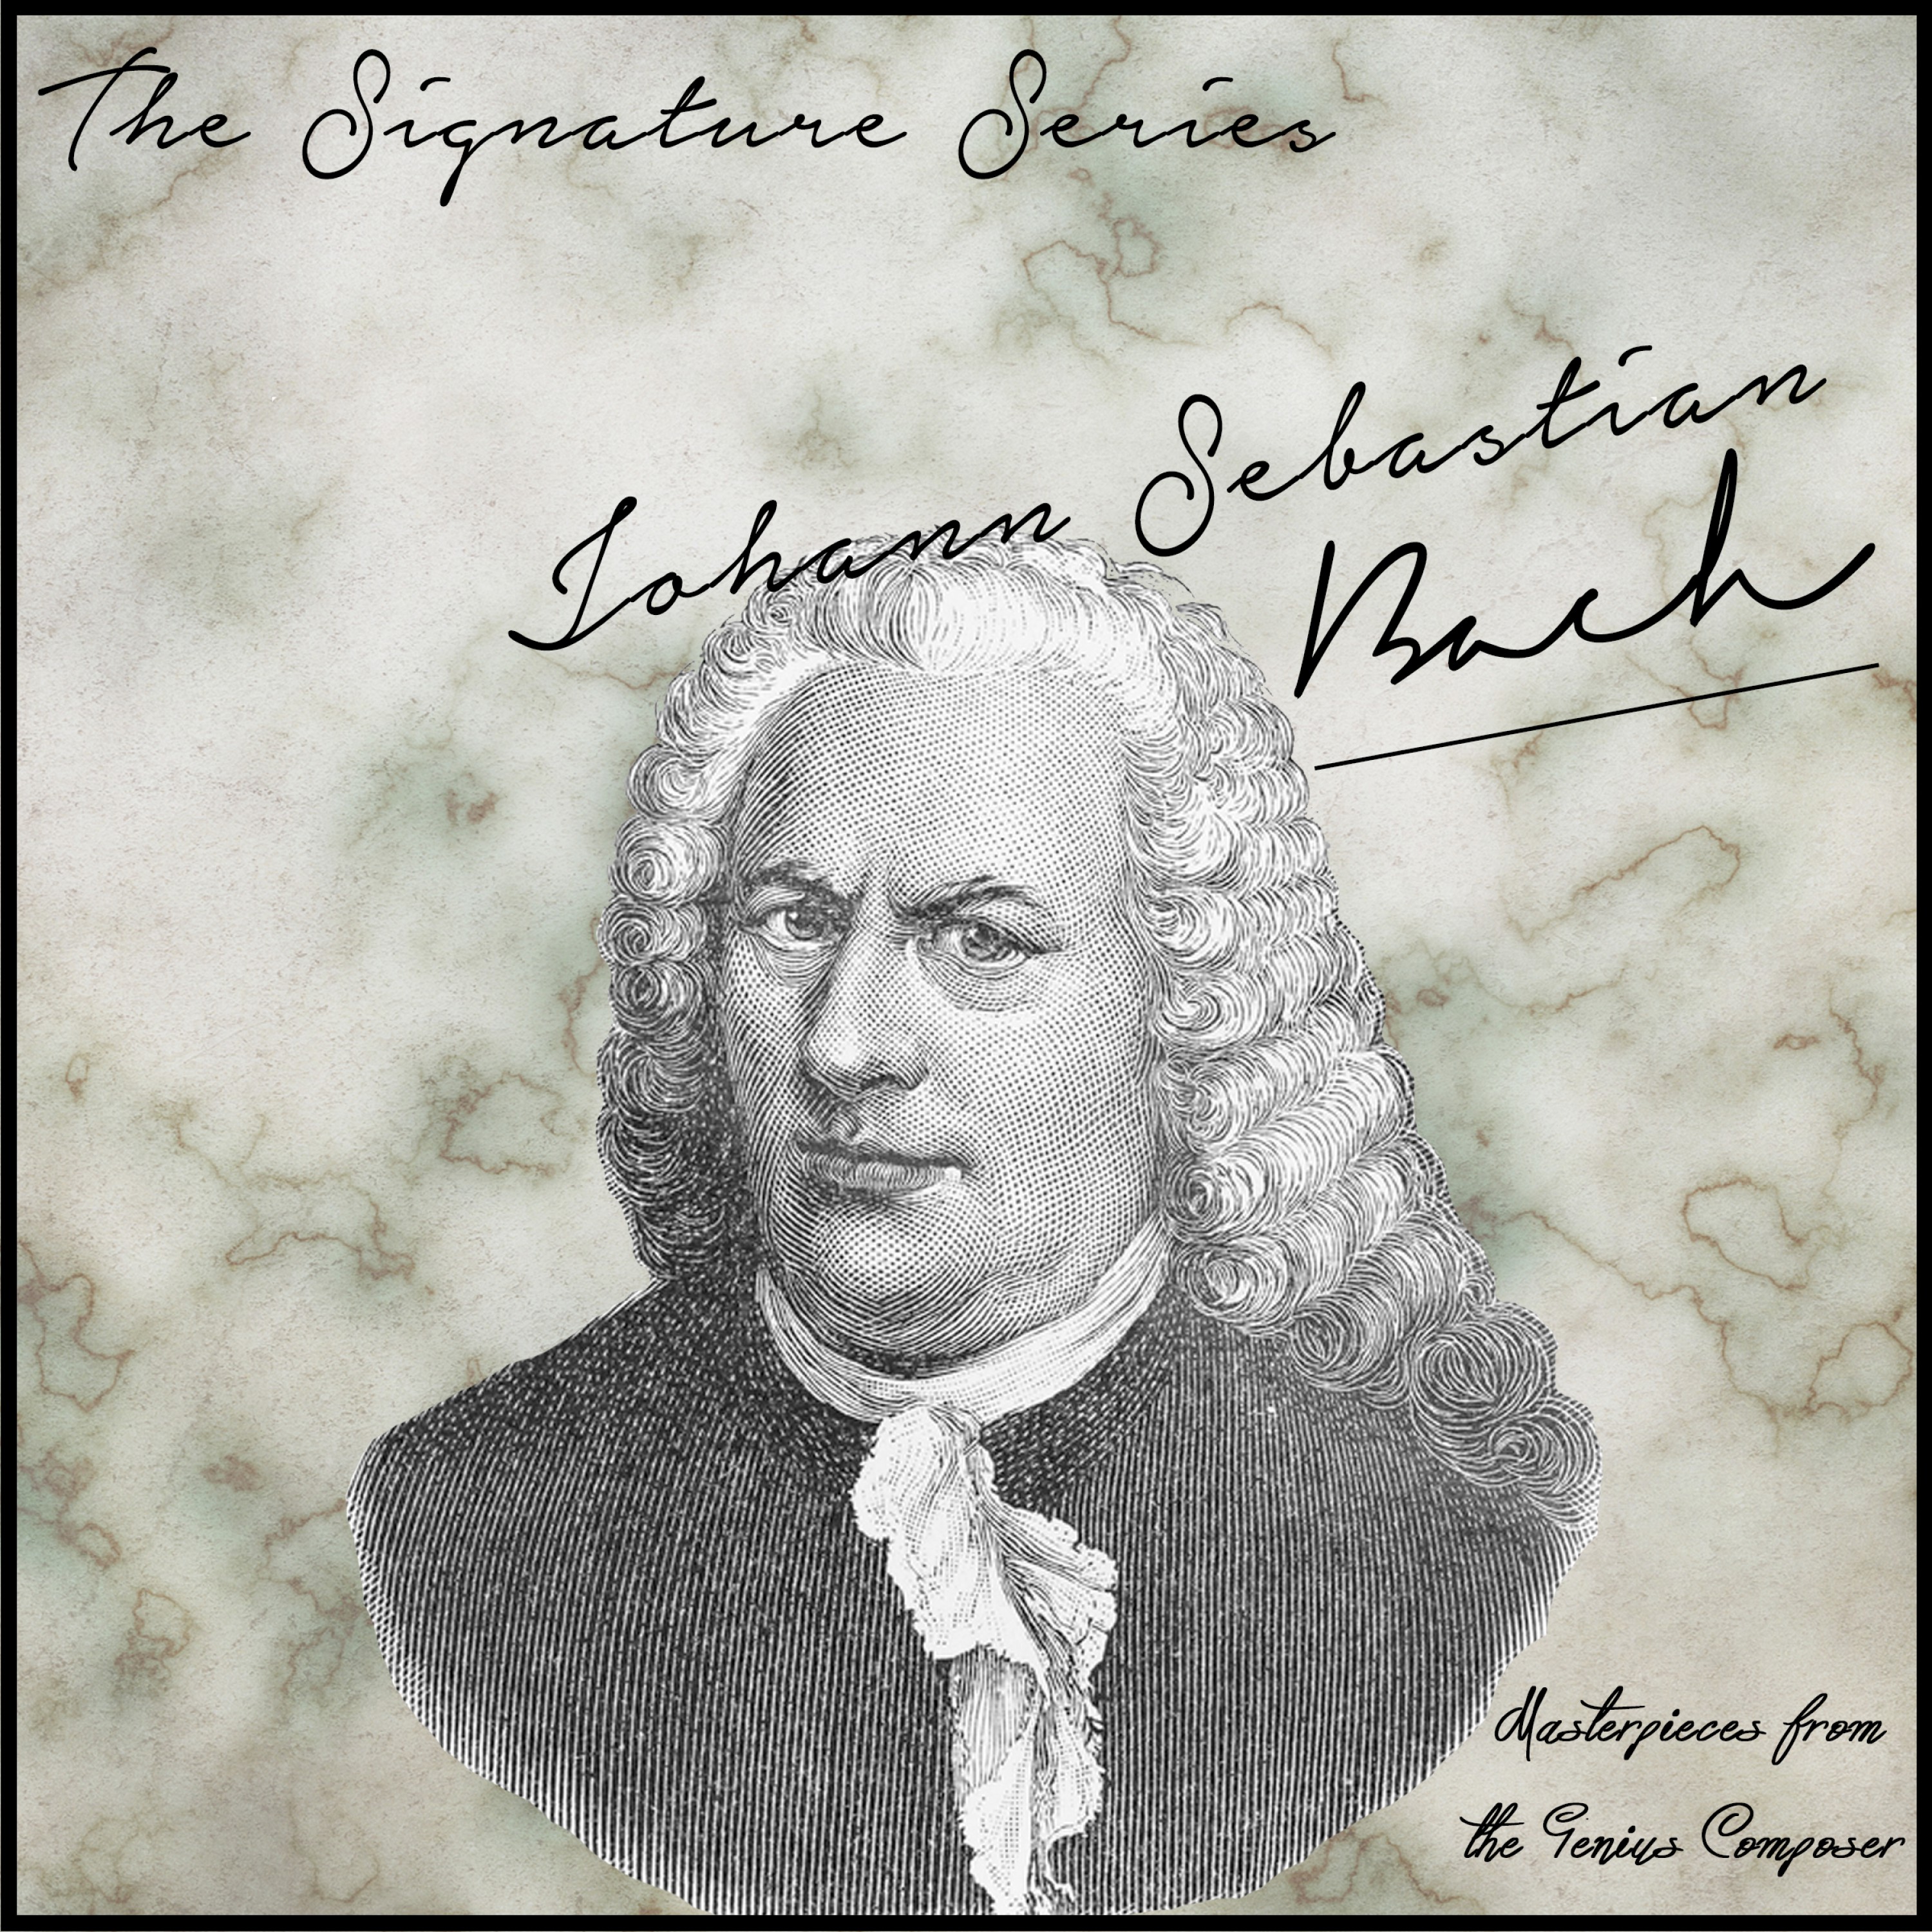 The Signature Series: Johann Sebastian Bach (Masterpieces from the Genius Composer)